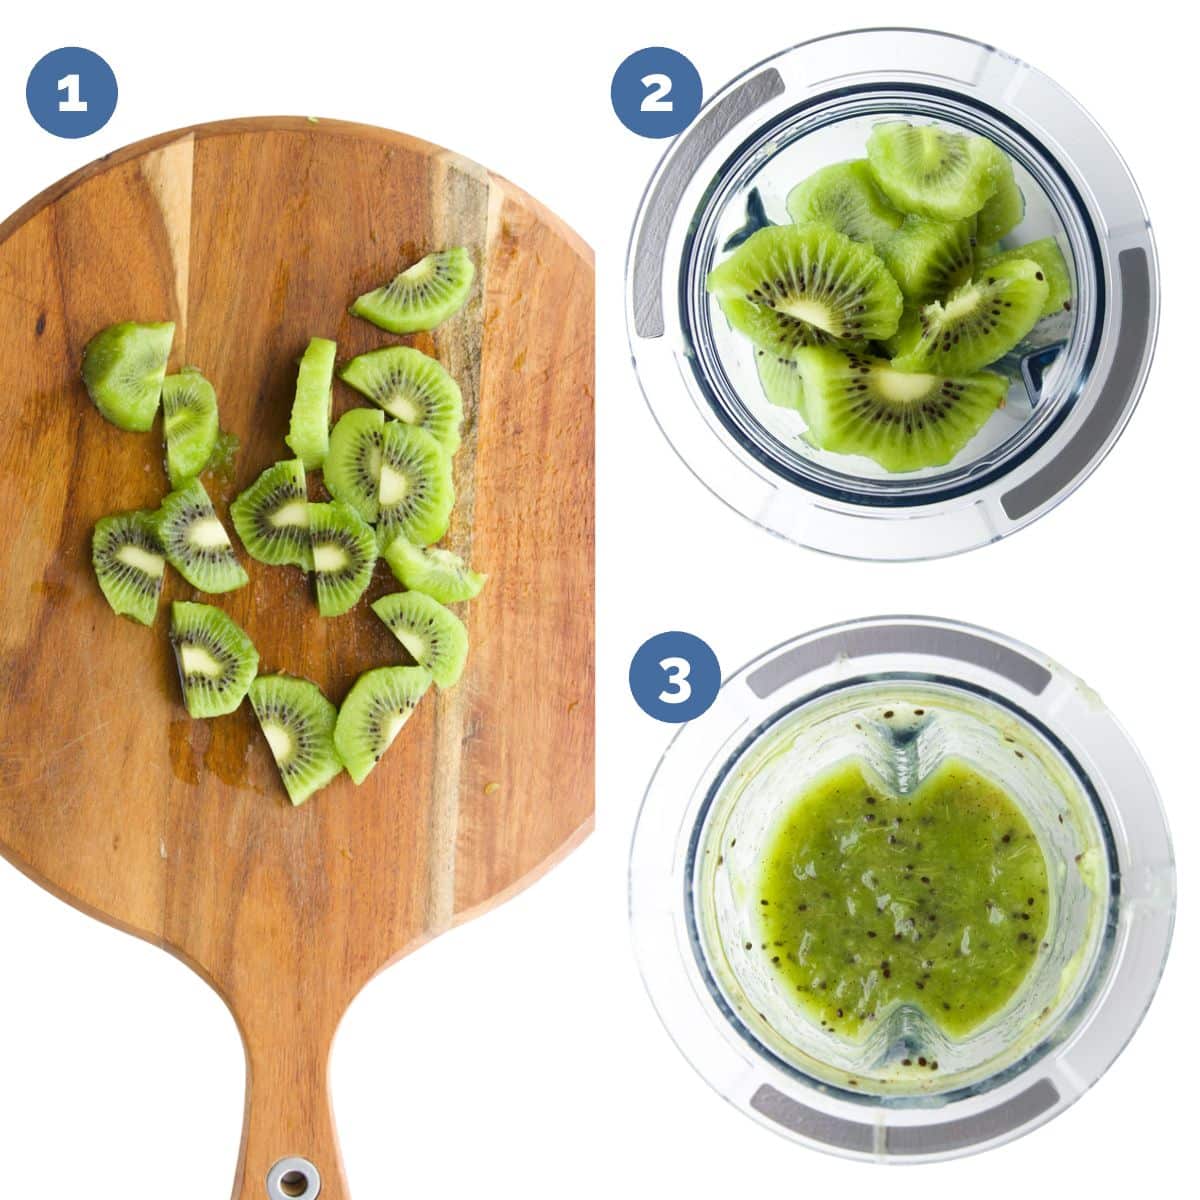 Collage of 3 Images - 1. Kiwi Peeled and Sliced on Wooden Chopping Board 2. Kiwi In Blended Before Blended 3. Kiwi in Blender after Blending.